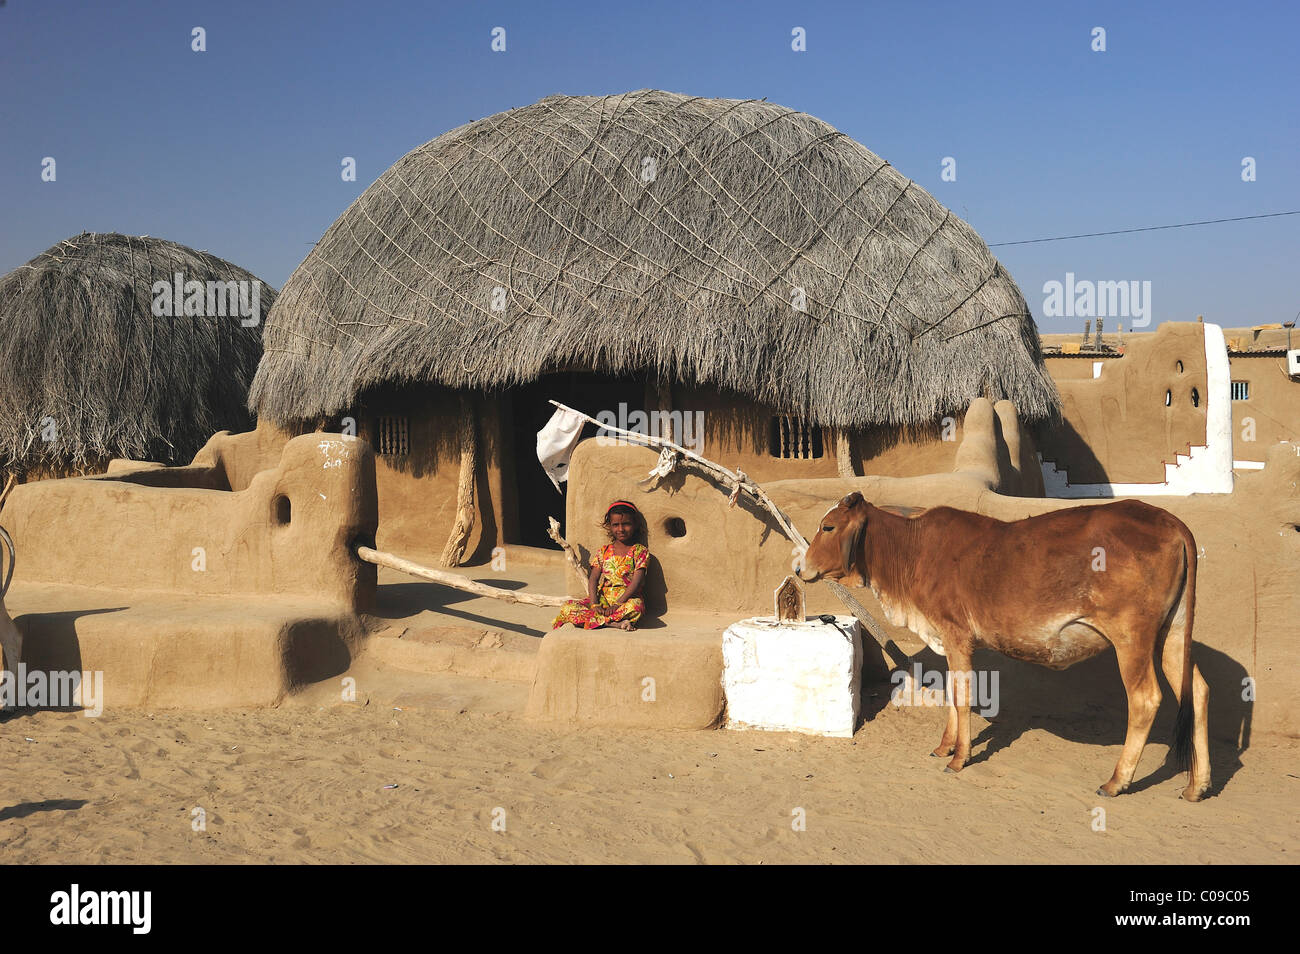 Traditional house with a walled courtyard, Thar Desert, Rajasthan, India, Asia Stock Photo